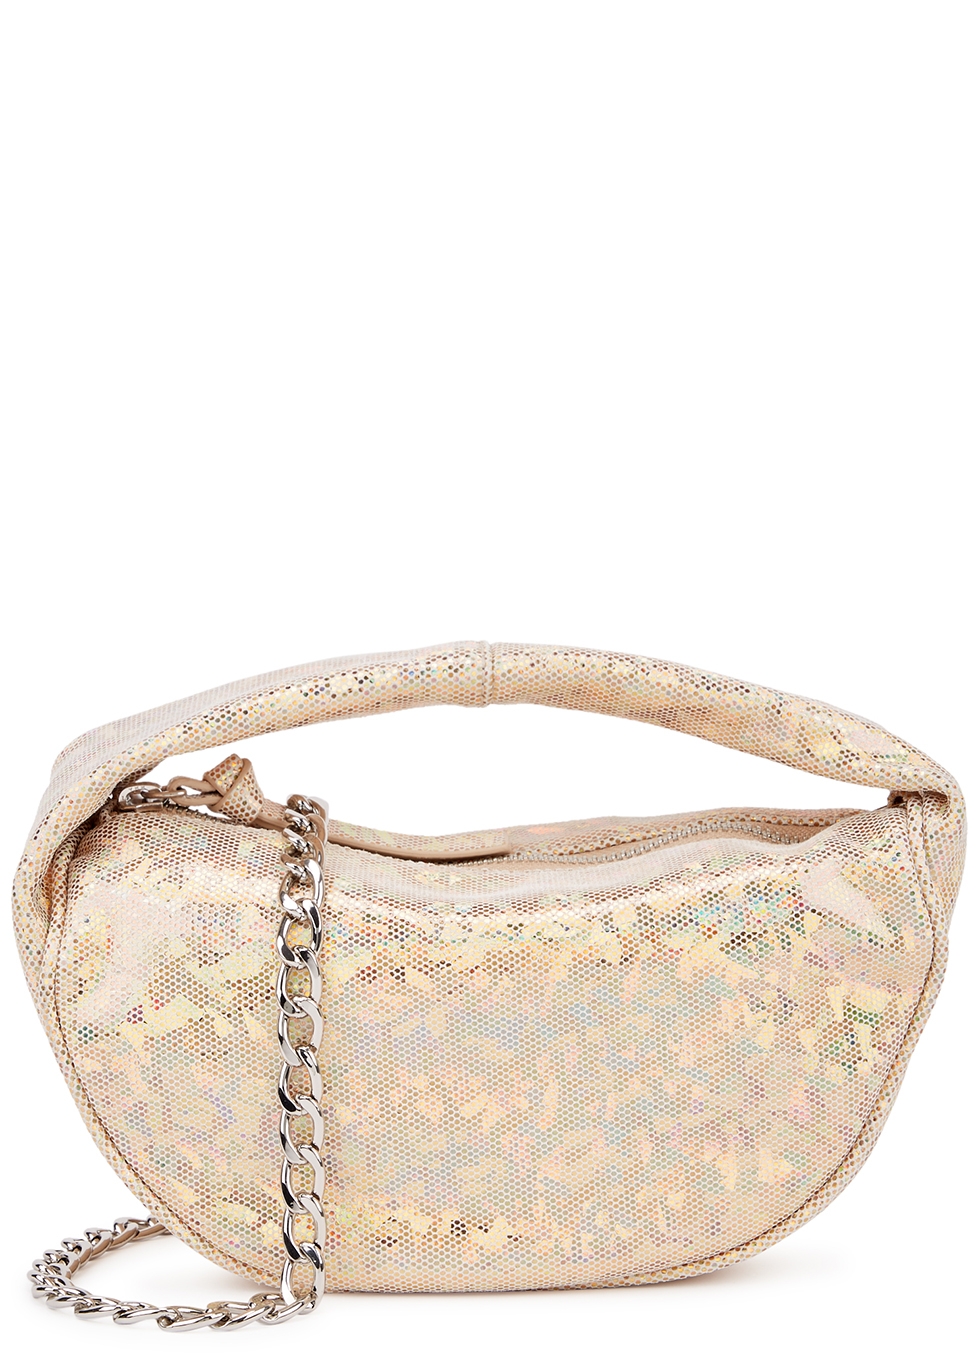 Baby Cush holographic suede top handle bag